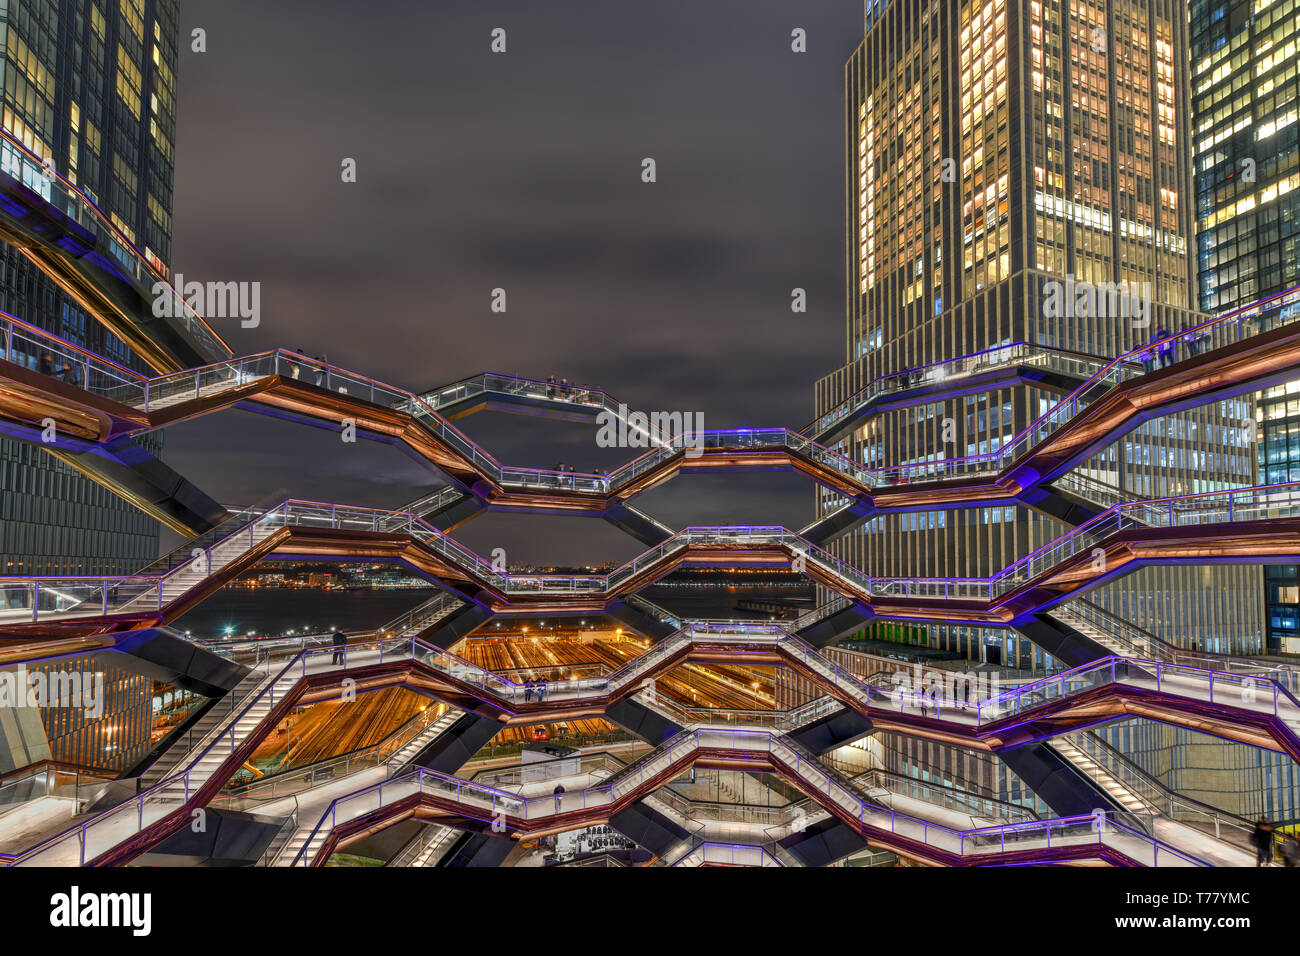 New York City - March 15, 2019: The Vessel, also known as the Hudson Yards Staircase (designed by architect Thomas Heatherwick) at dusk in Midtown Man Stock Photo